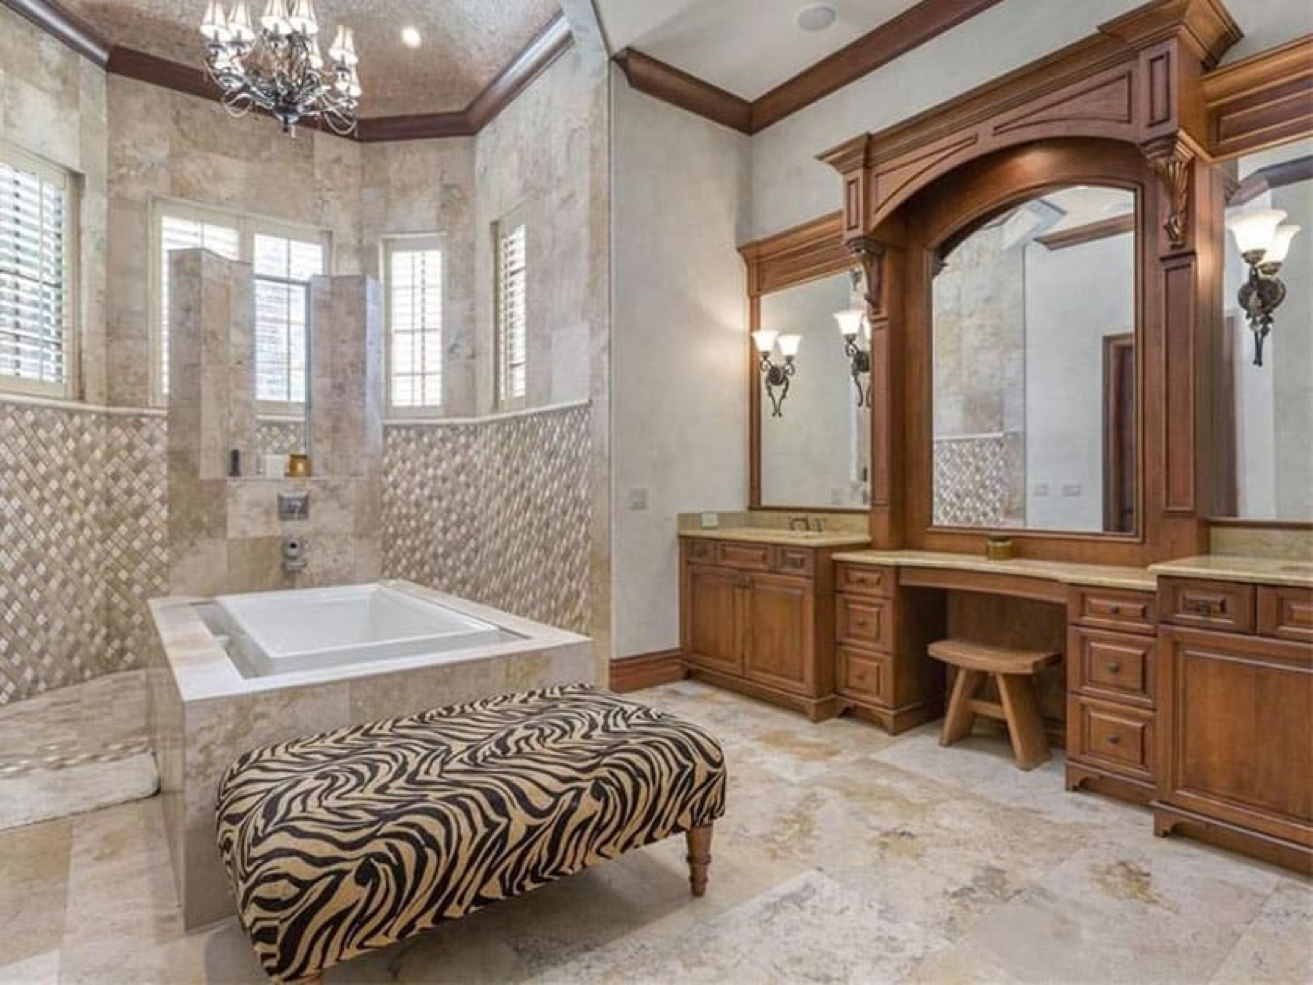 A large Craftsman-style bathroom with a zebra print bench.